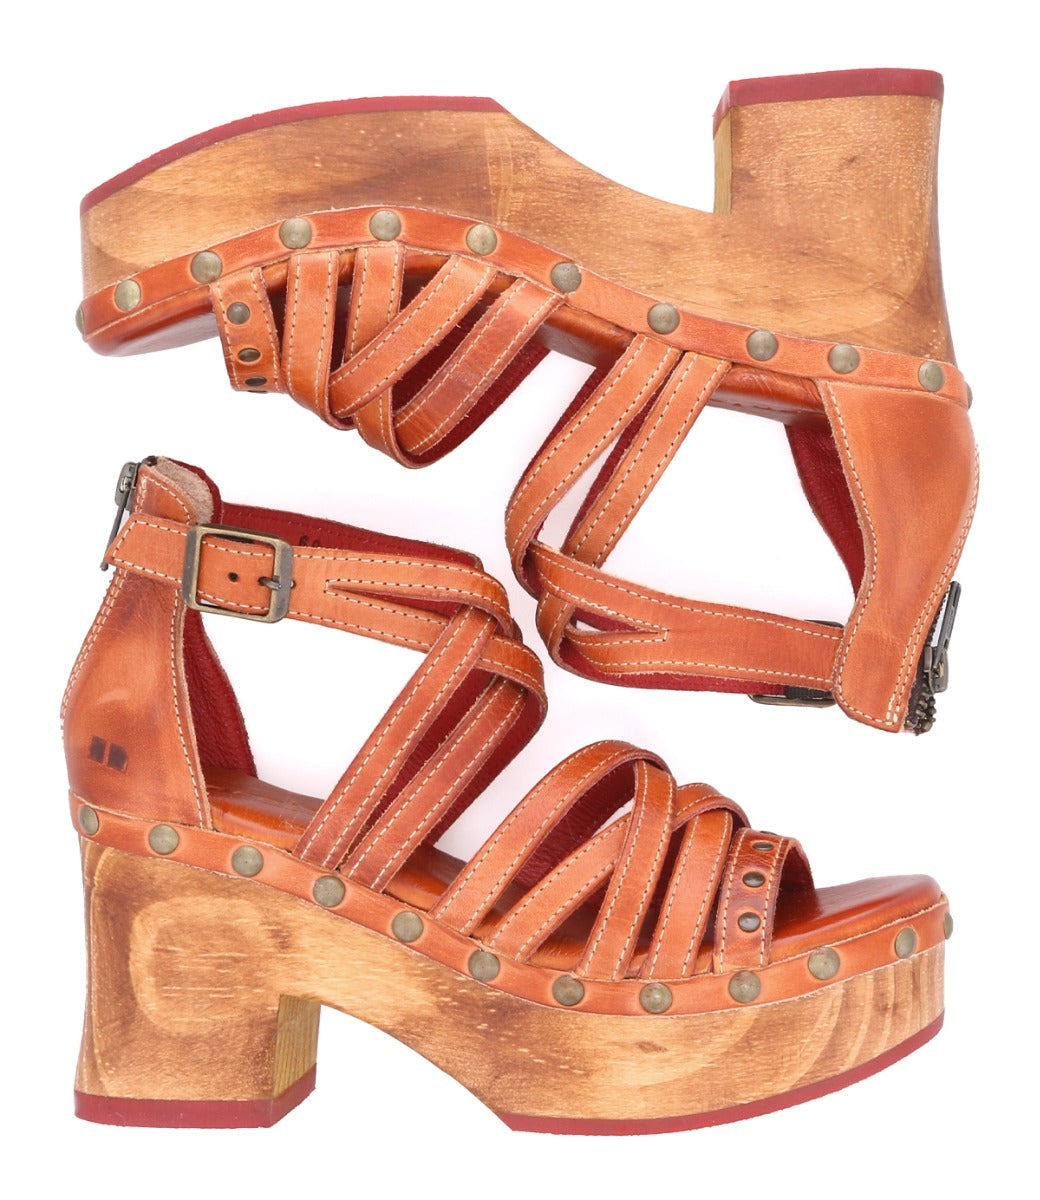 A pair of Antonelli wooden sandals with Bed Stu straps on them.